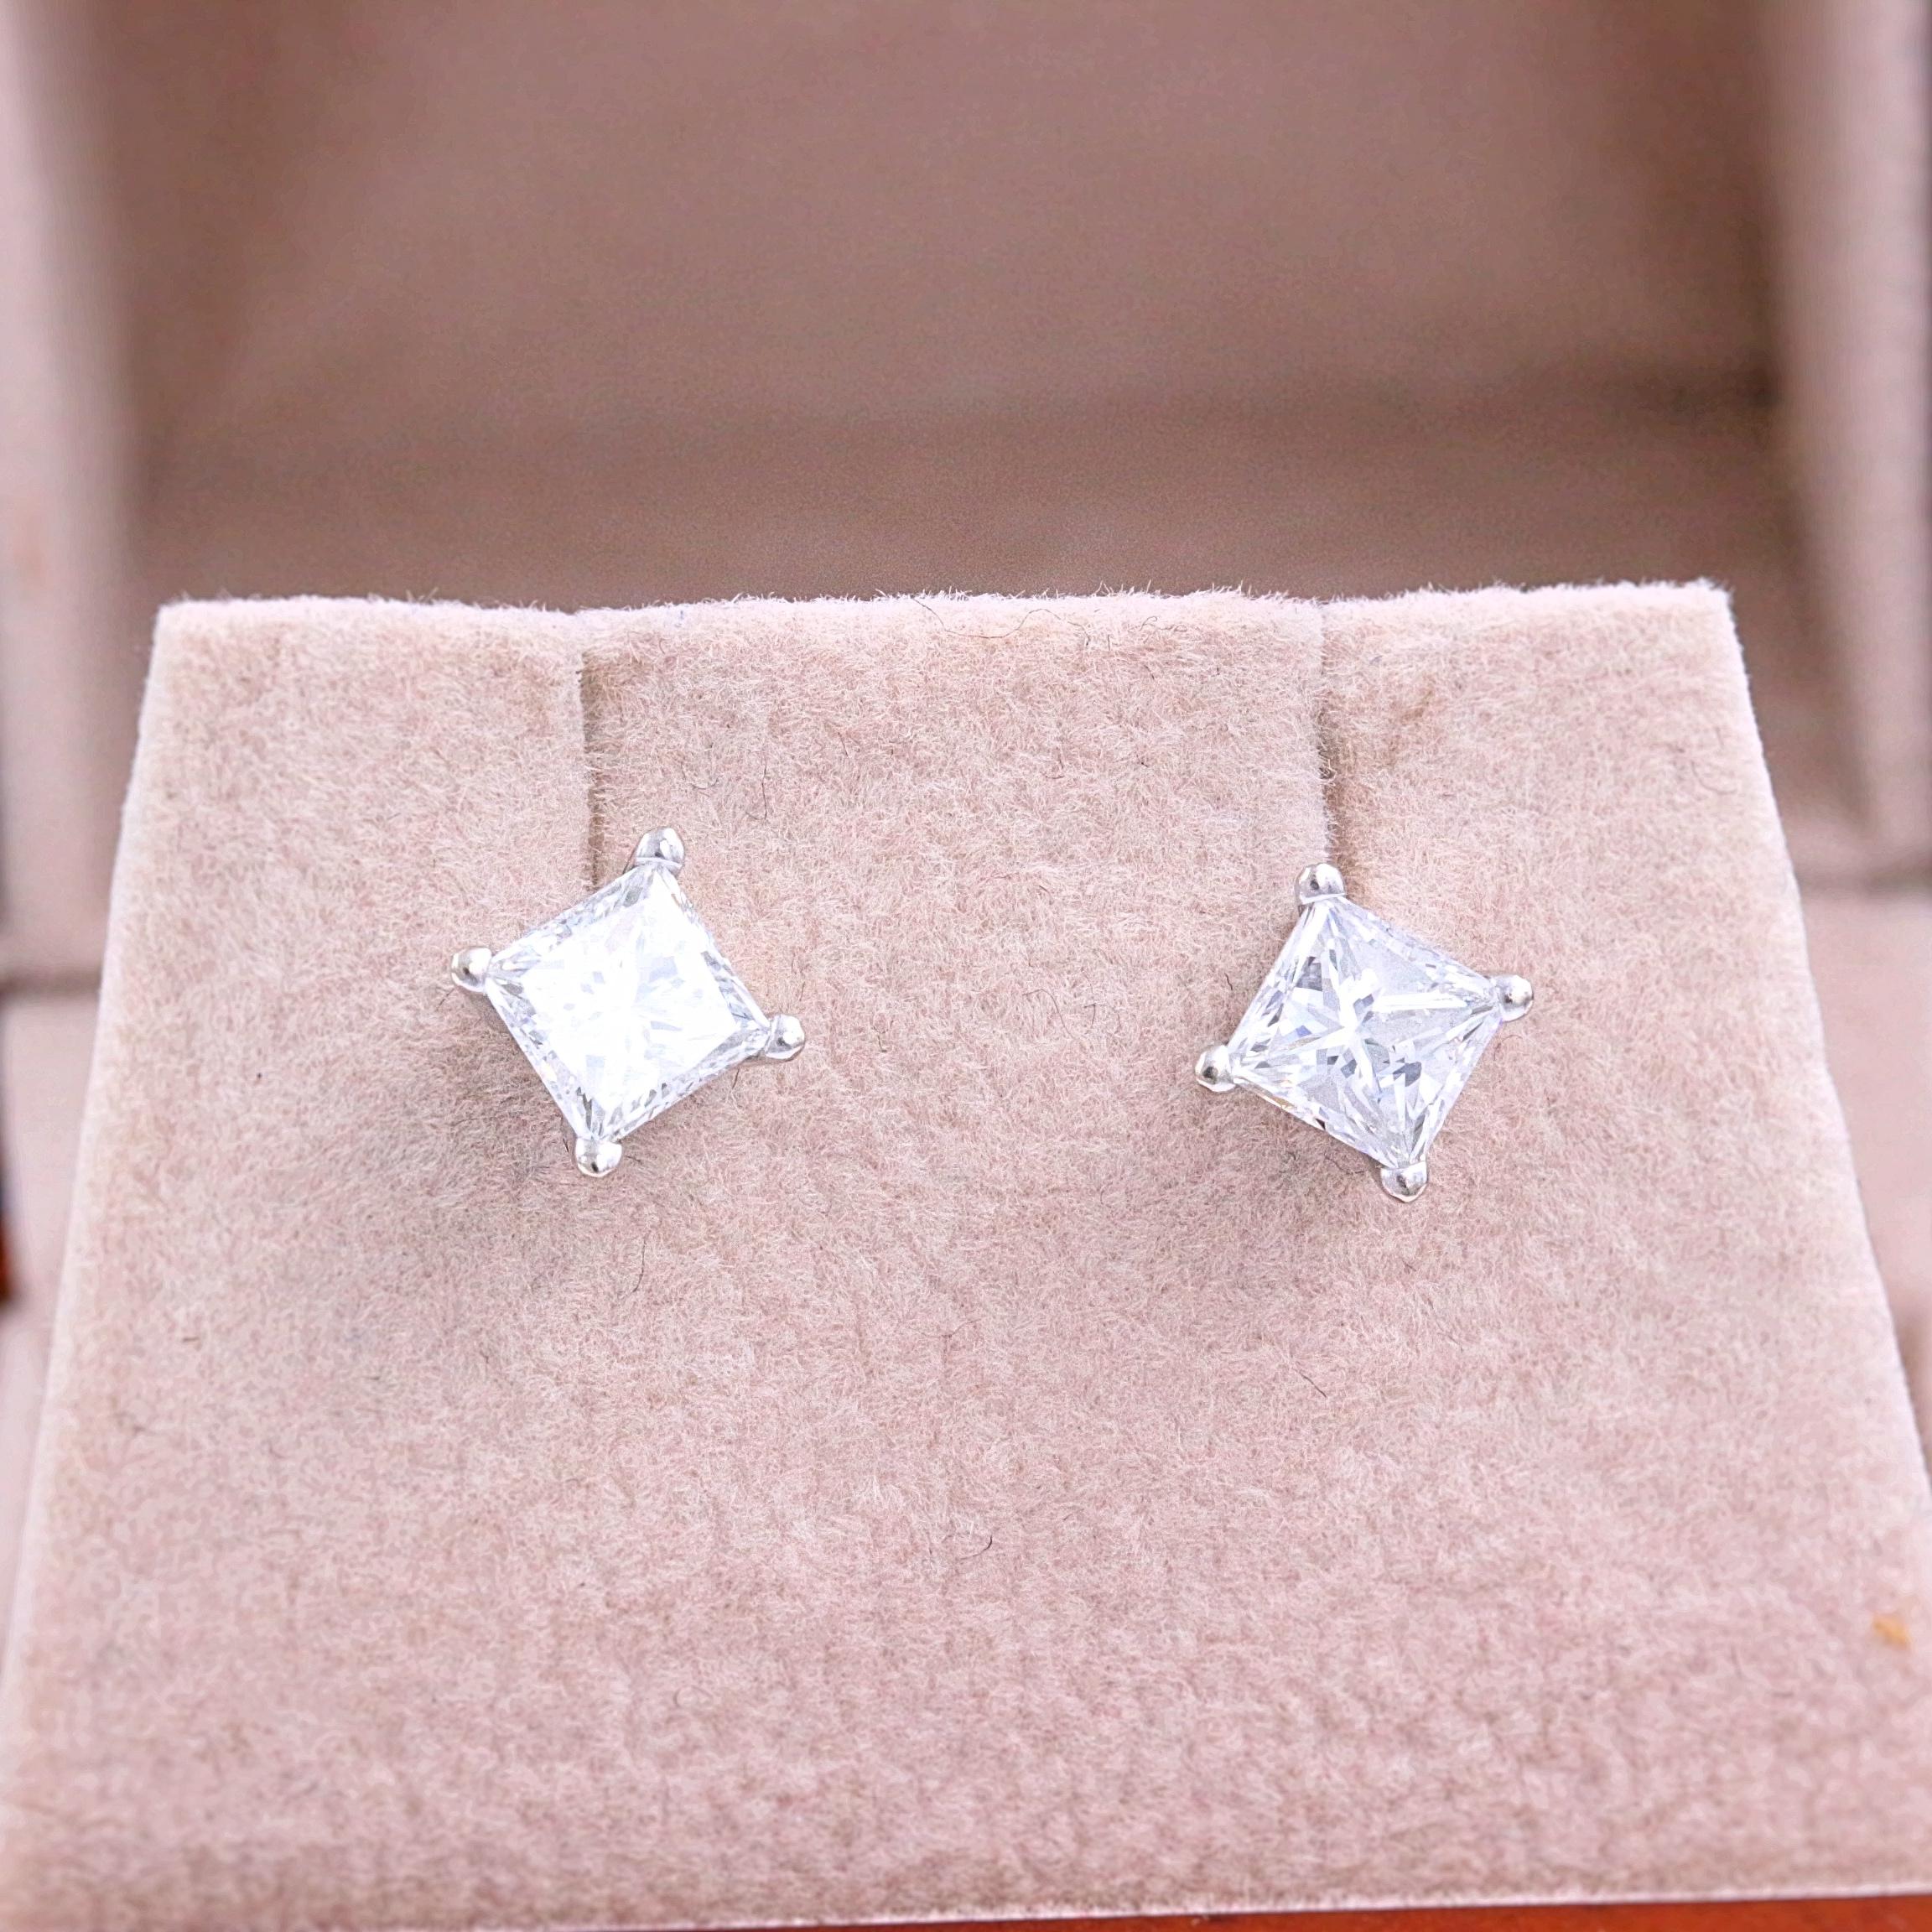 Princess Diamond Solitaire Stud Earrings 1.09 Carat 18 Karat Gold Certificate In Excellent Condition For Sale In San Diego, CA